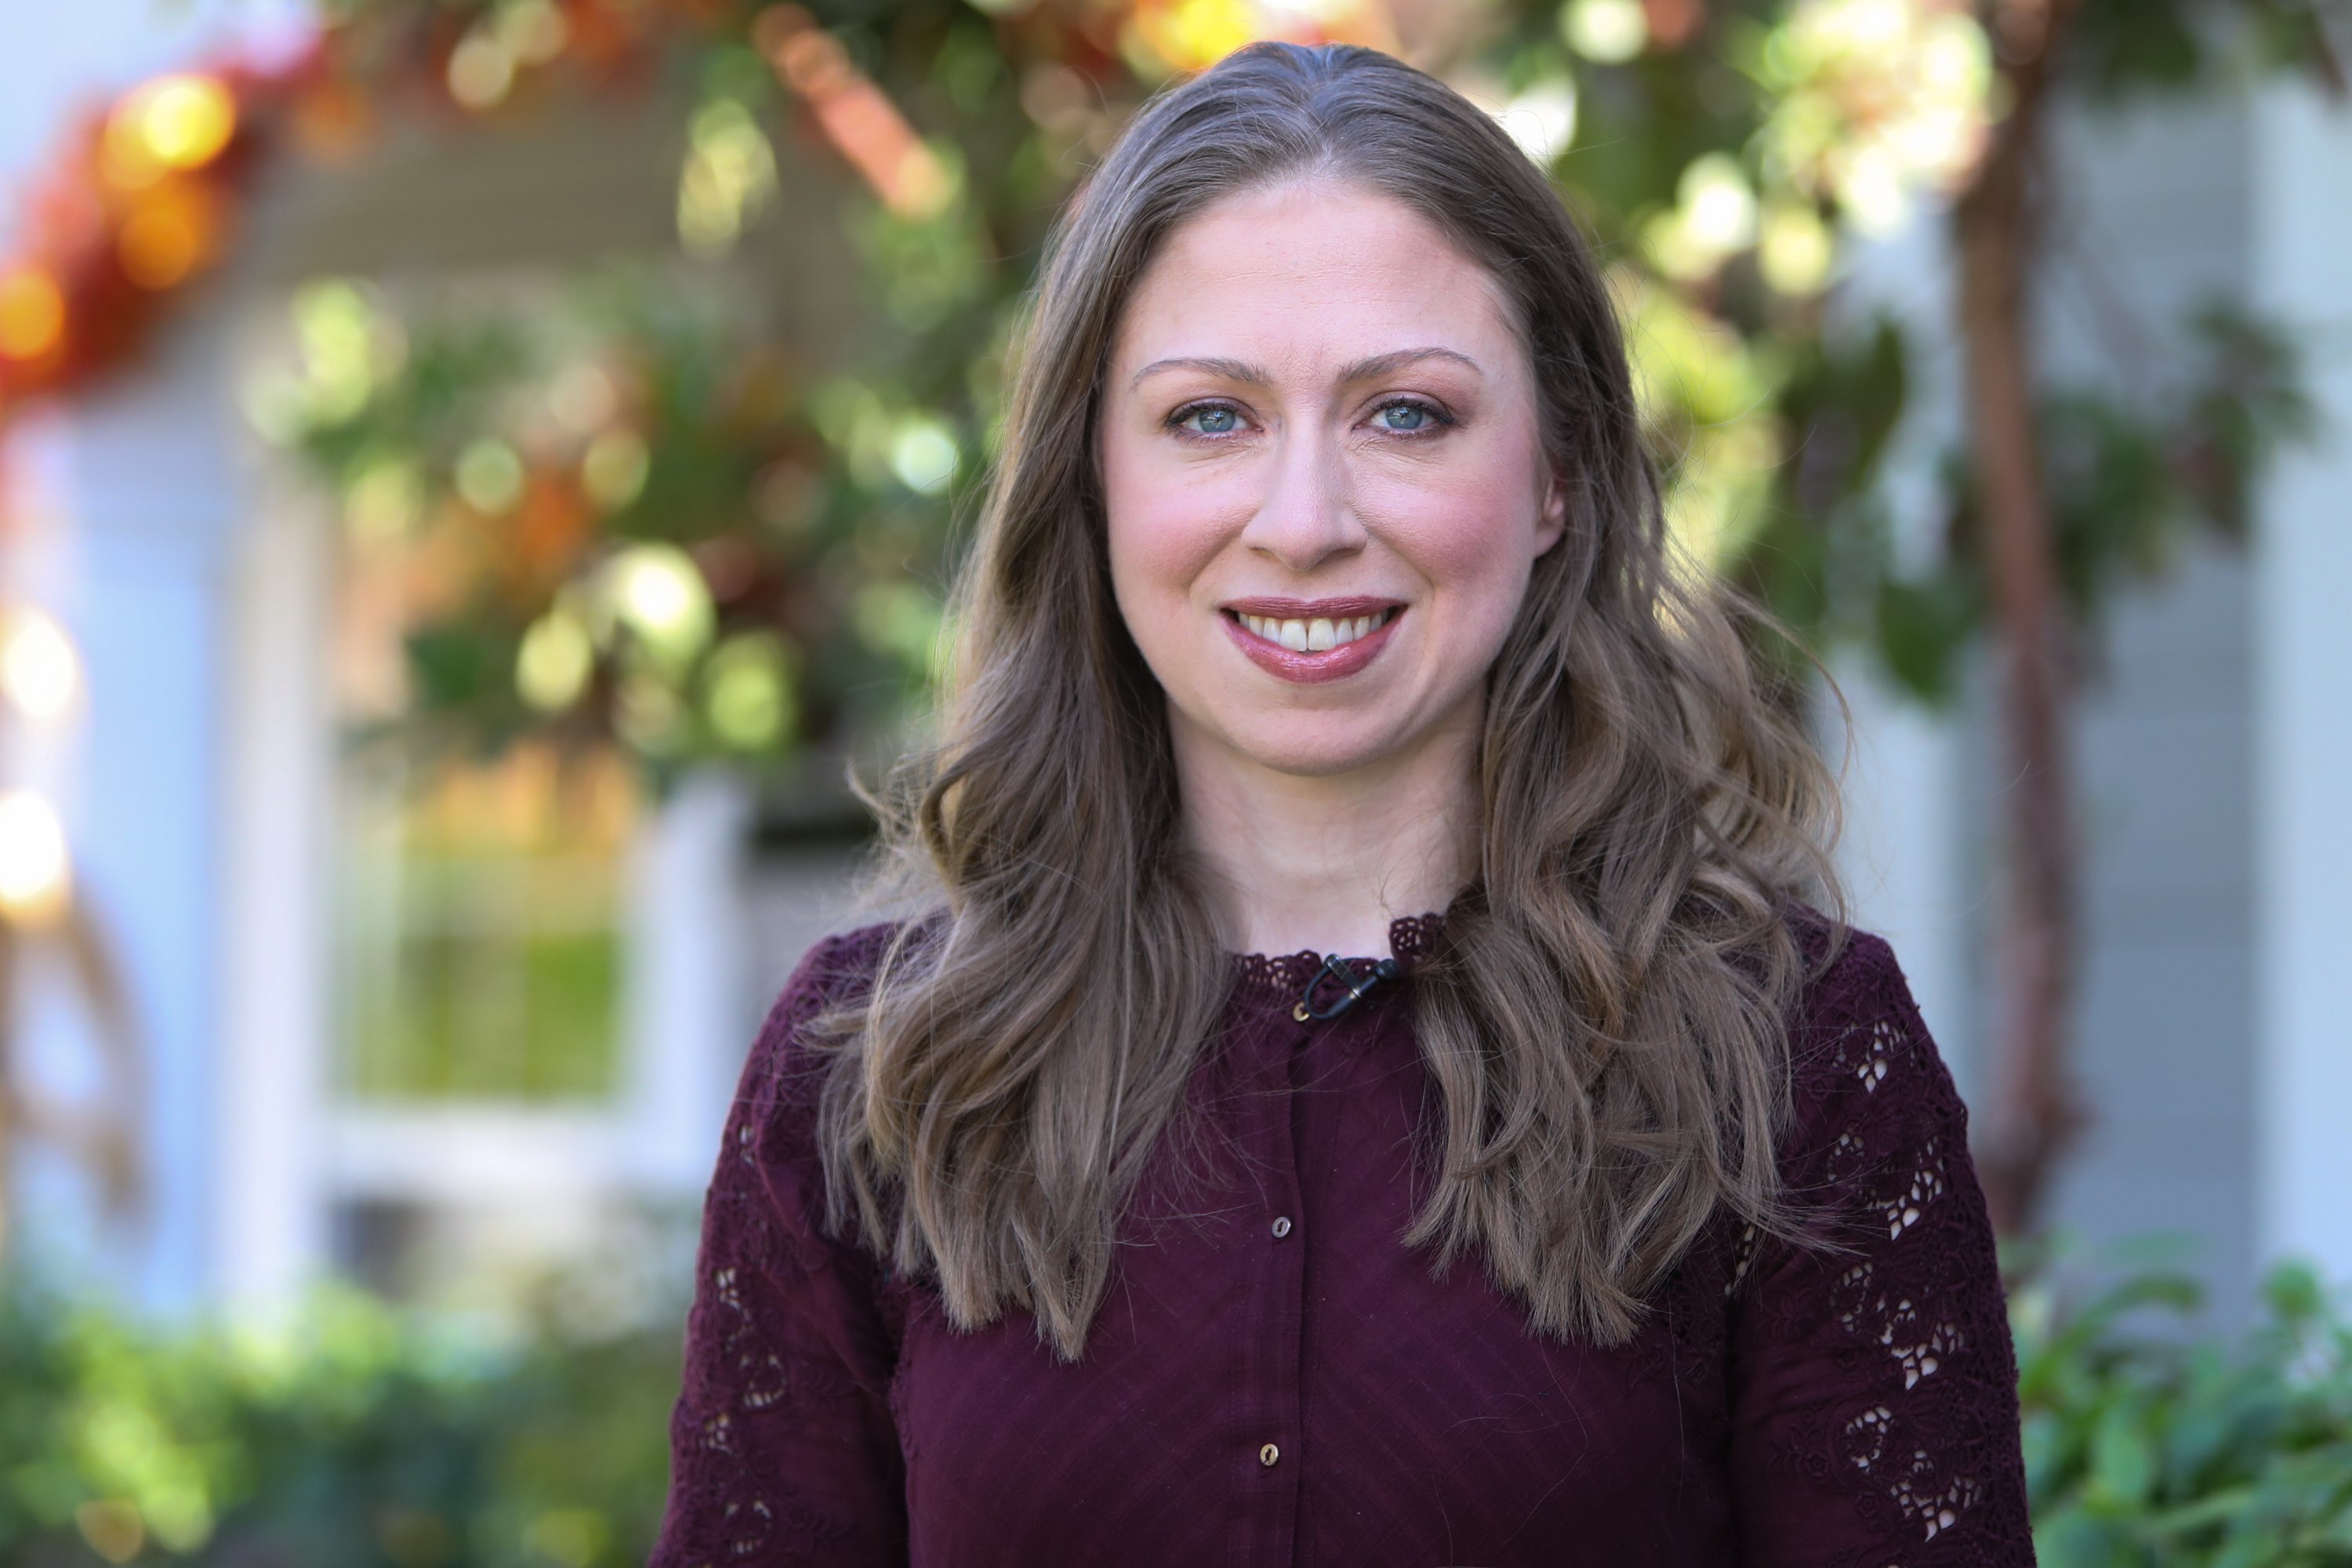 Chelsea Clinton visiting Hallmark's "Home & Family" in 2018. | Photo: Getty Images